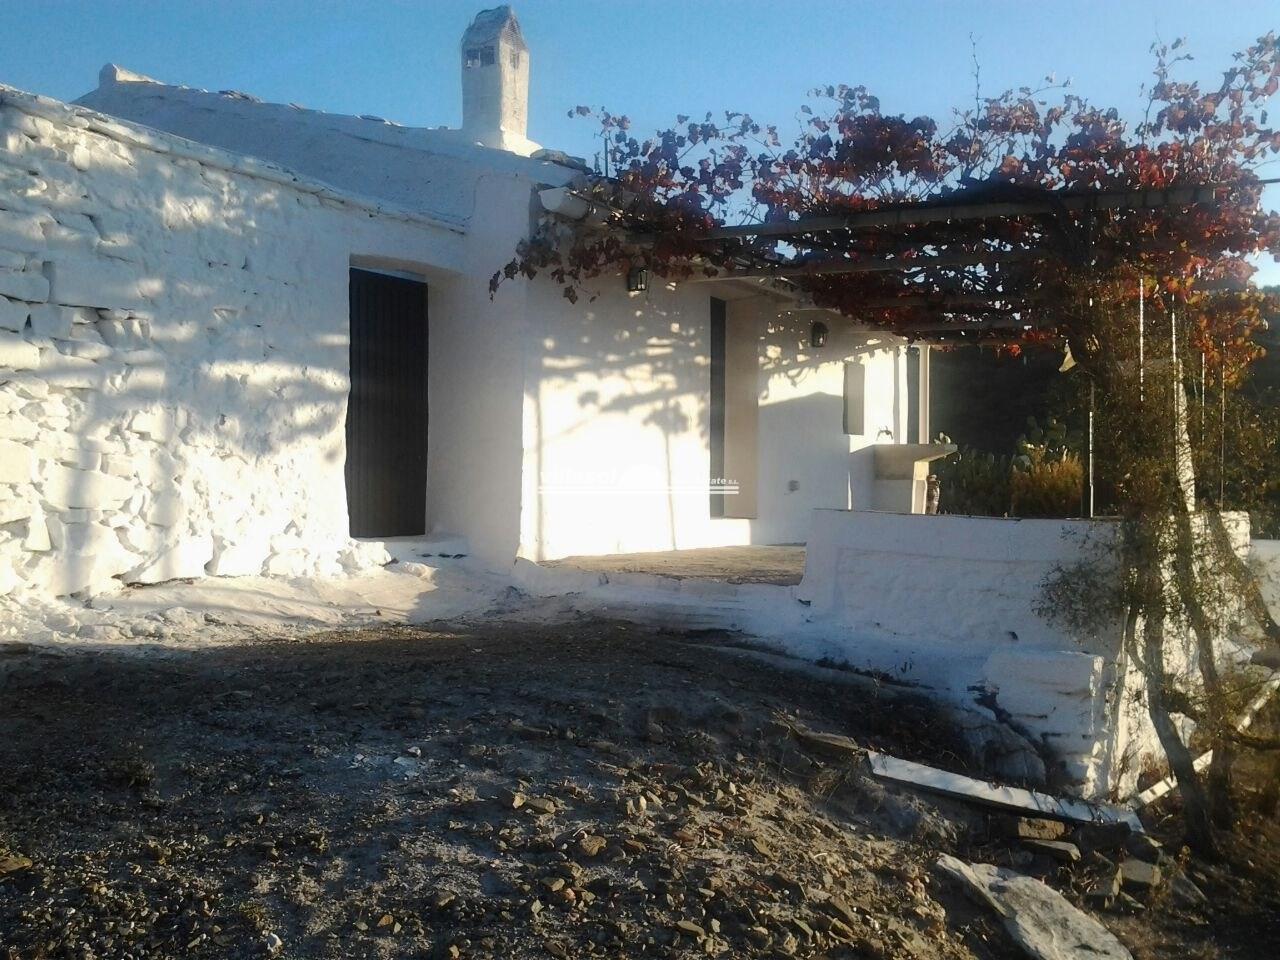 1 Bedroom Cortijo With Good Access For Sale Situated In Torrox Countryside